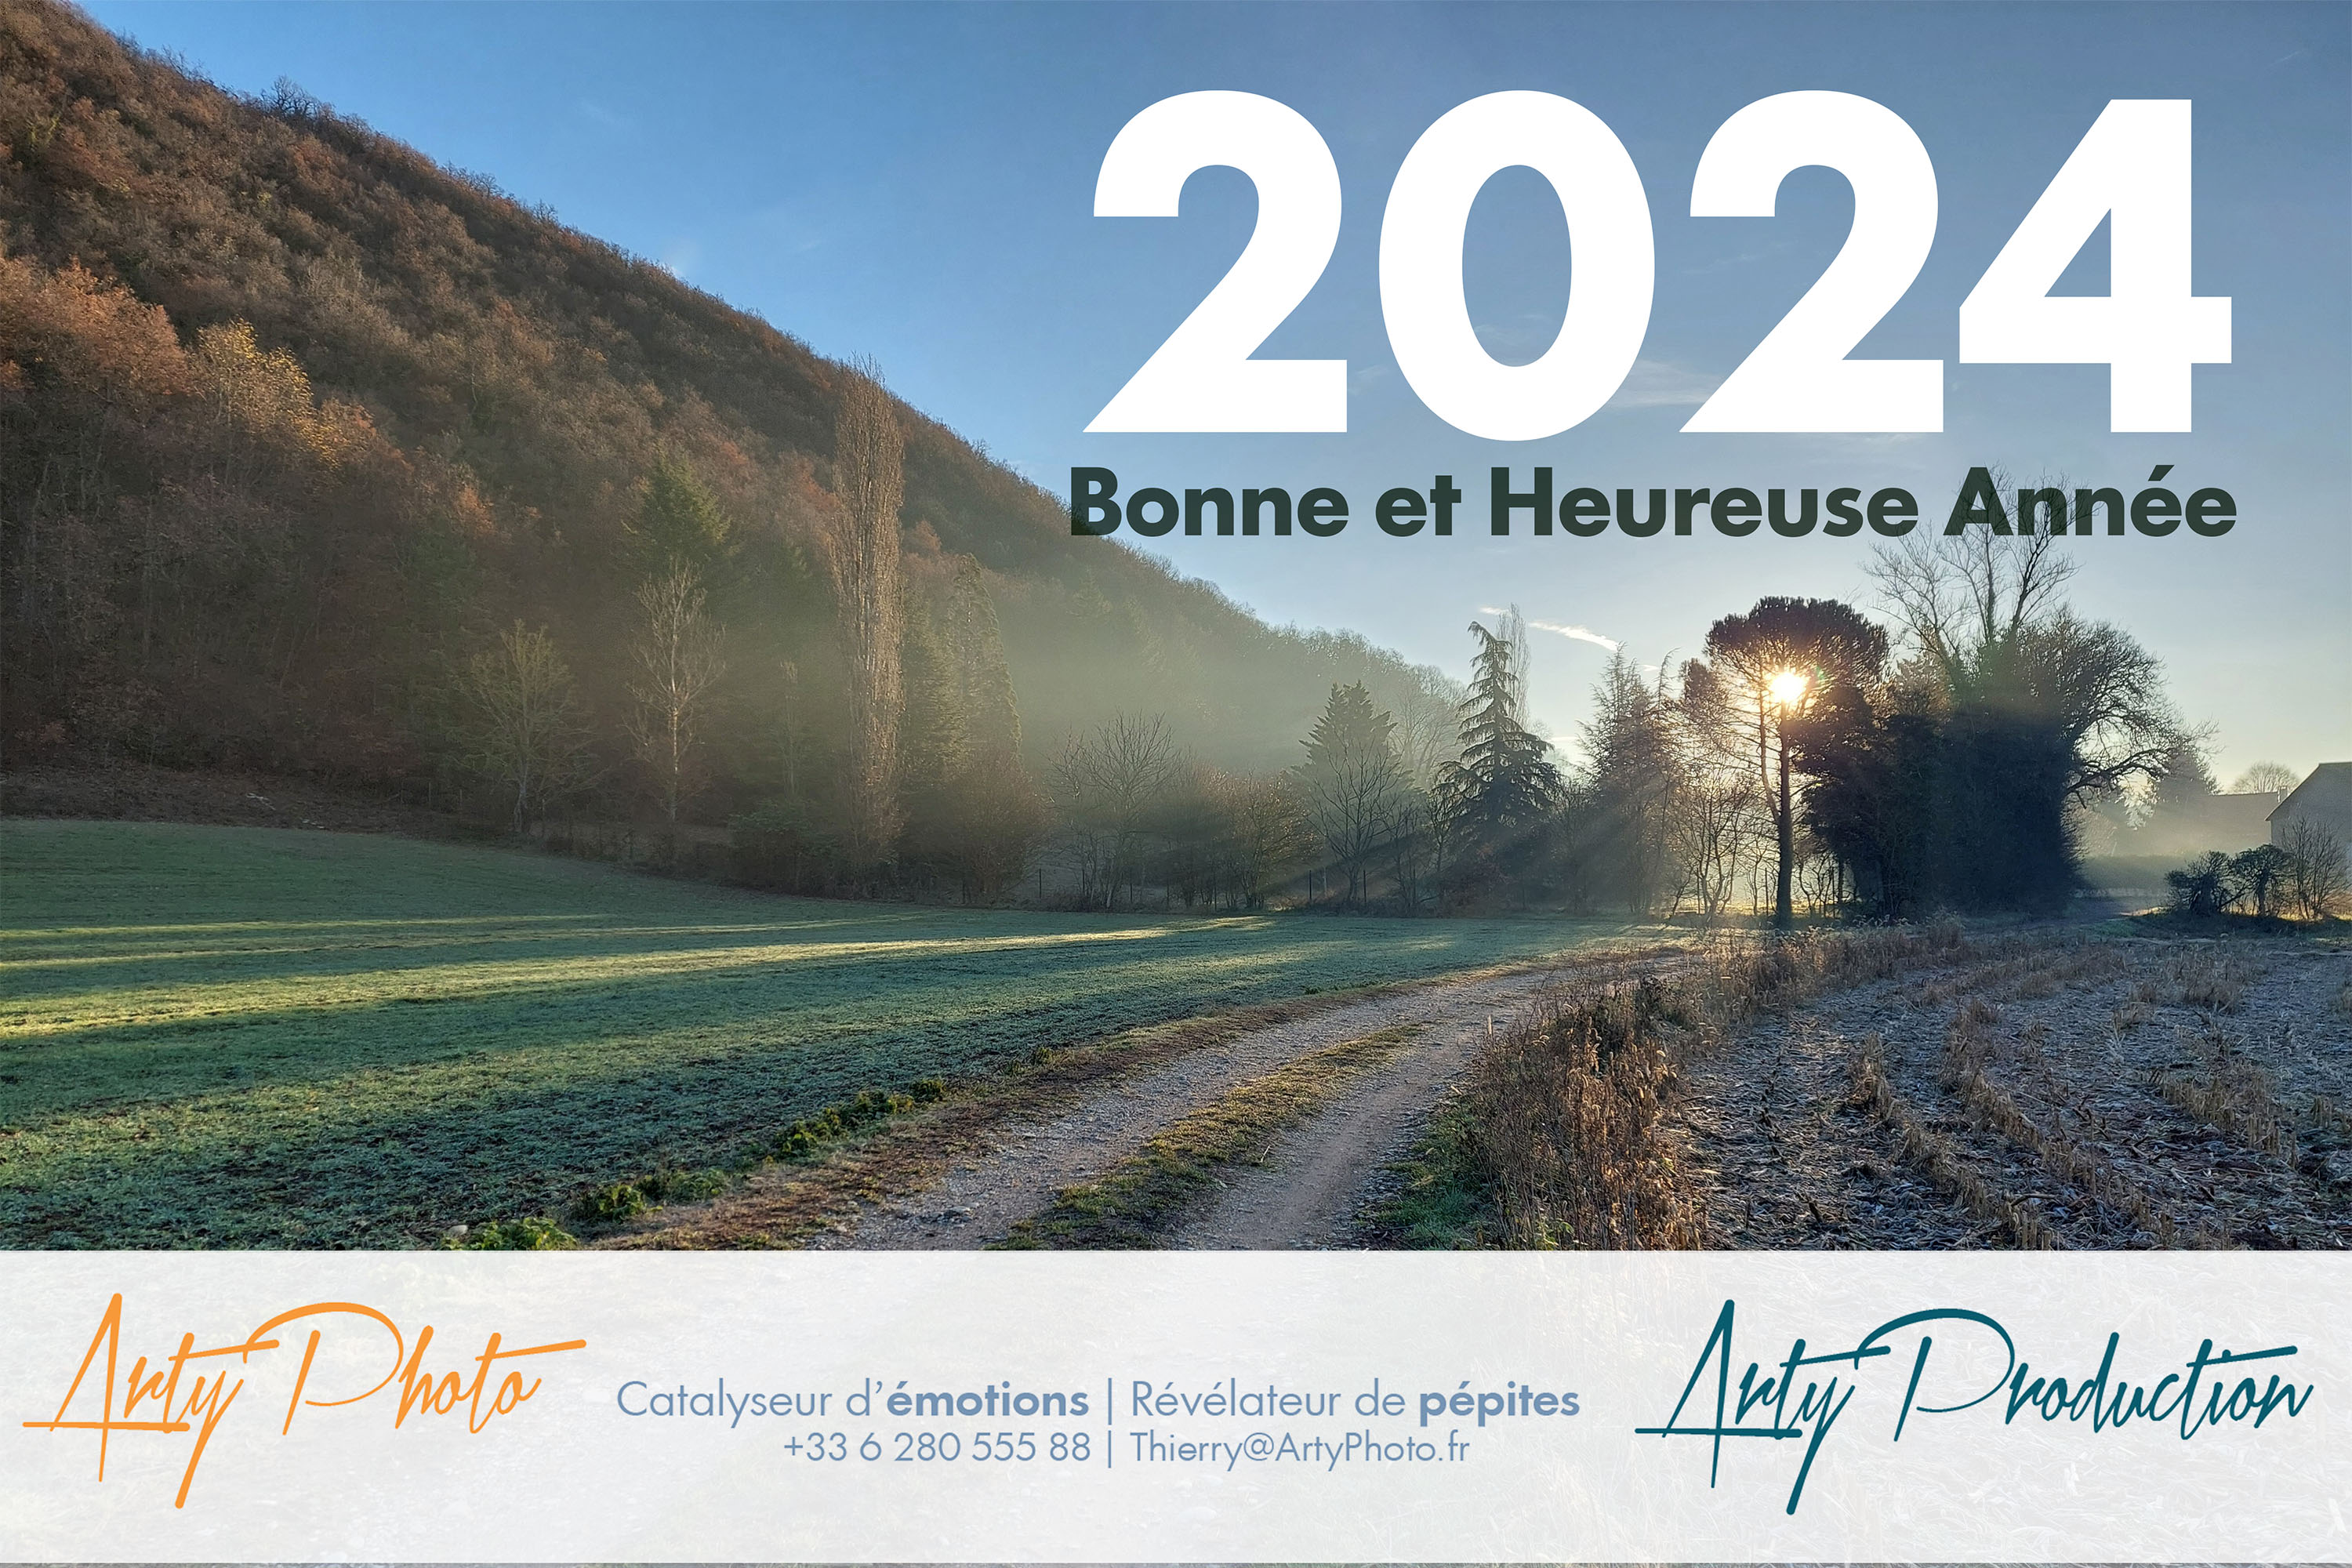 Meilleurs Voeux pour 2024 - Happy New year, best wishes for 2024